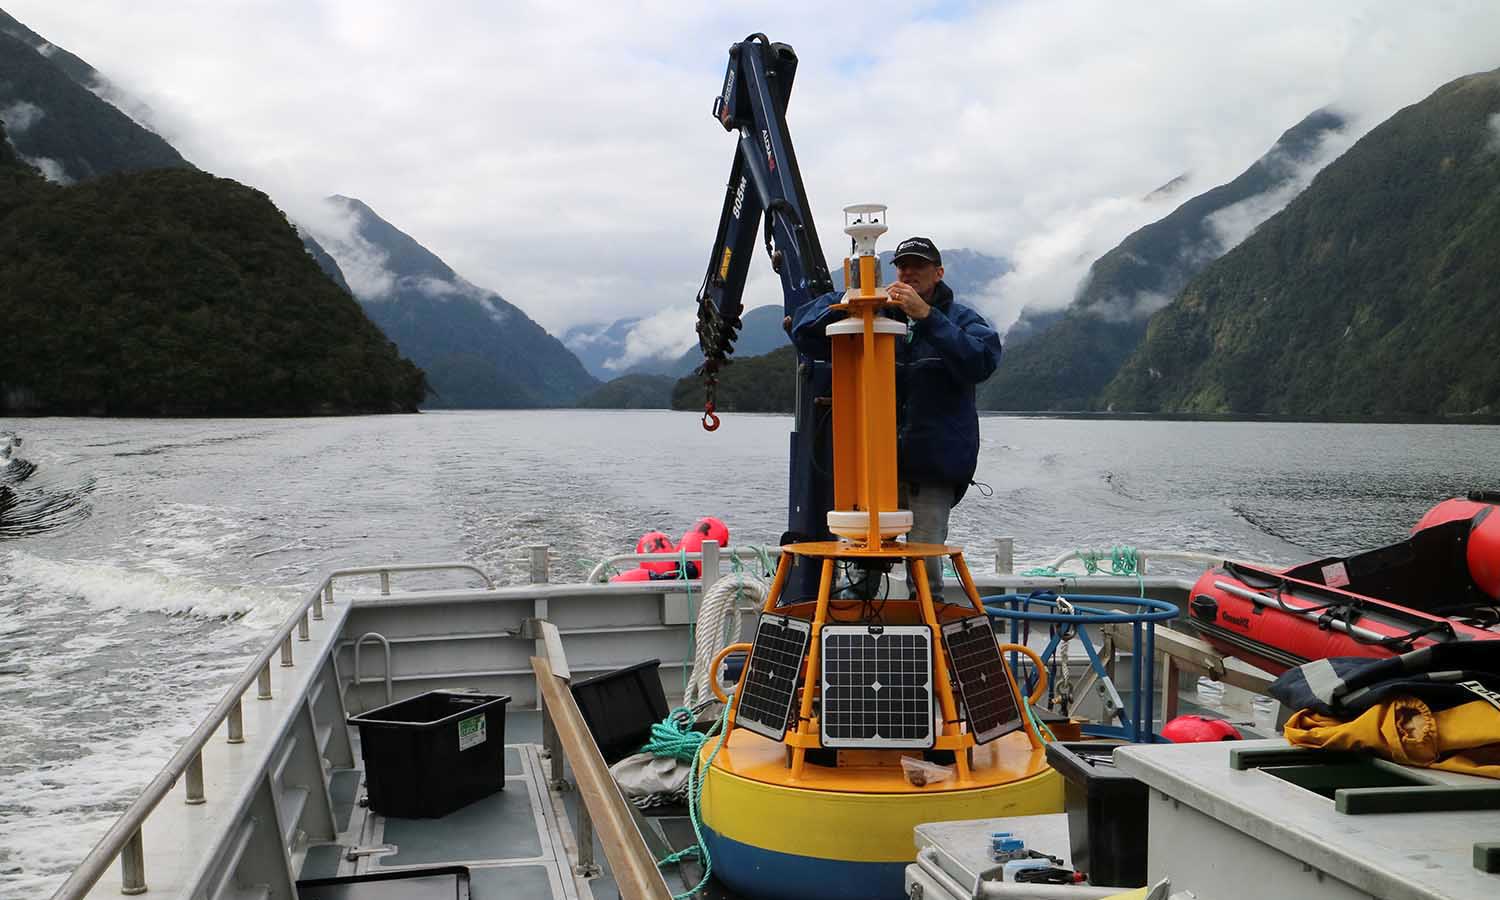 Man preparing a research buoy on a boat in Doubtful Sound, New Zealand